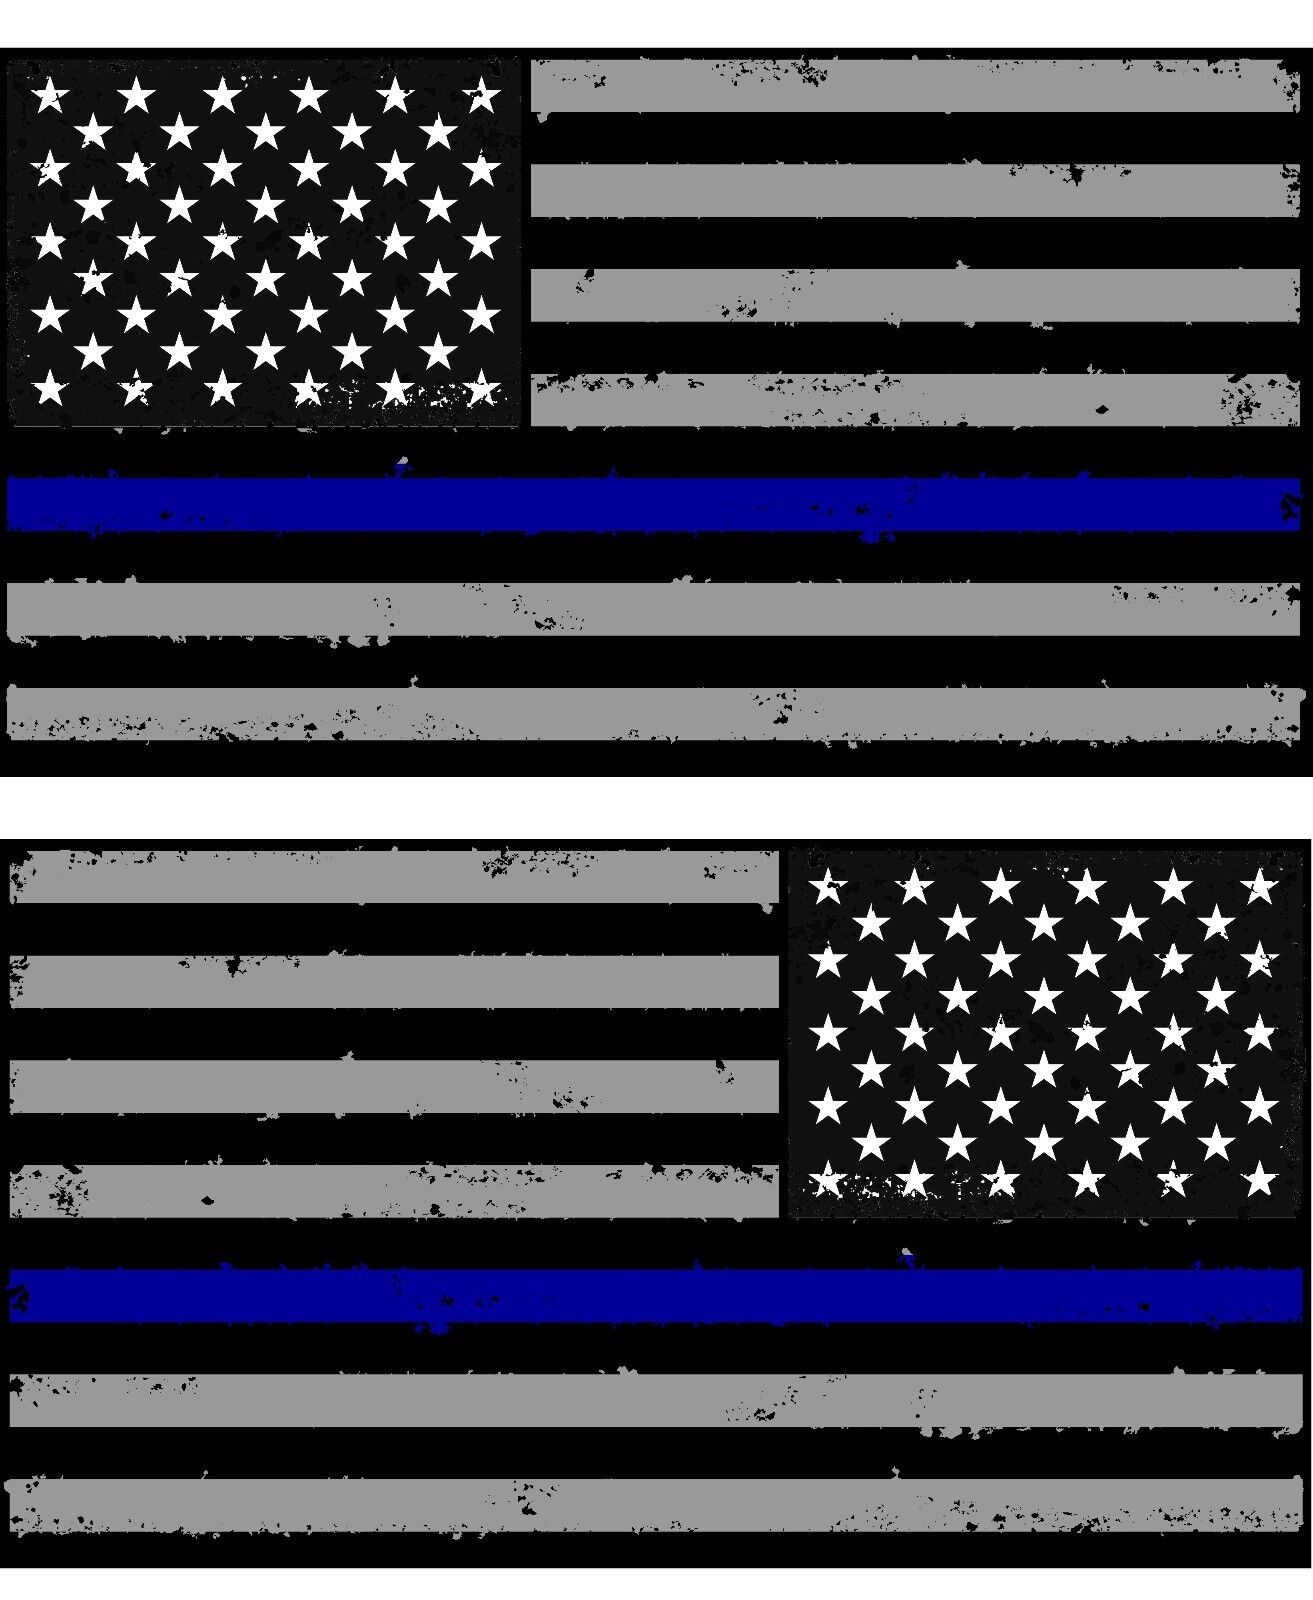 Tattered Police Blue Colors Grunge American Flag Decals Stickers x 2 (Blue)#2